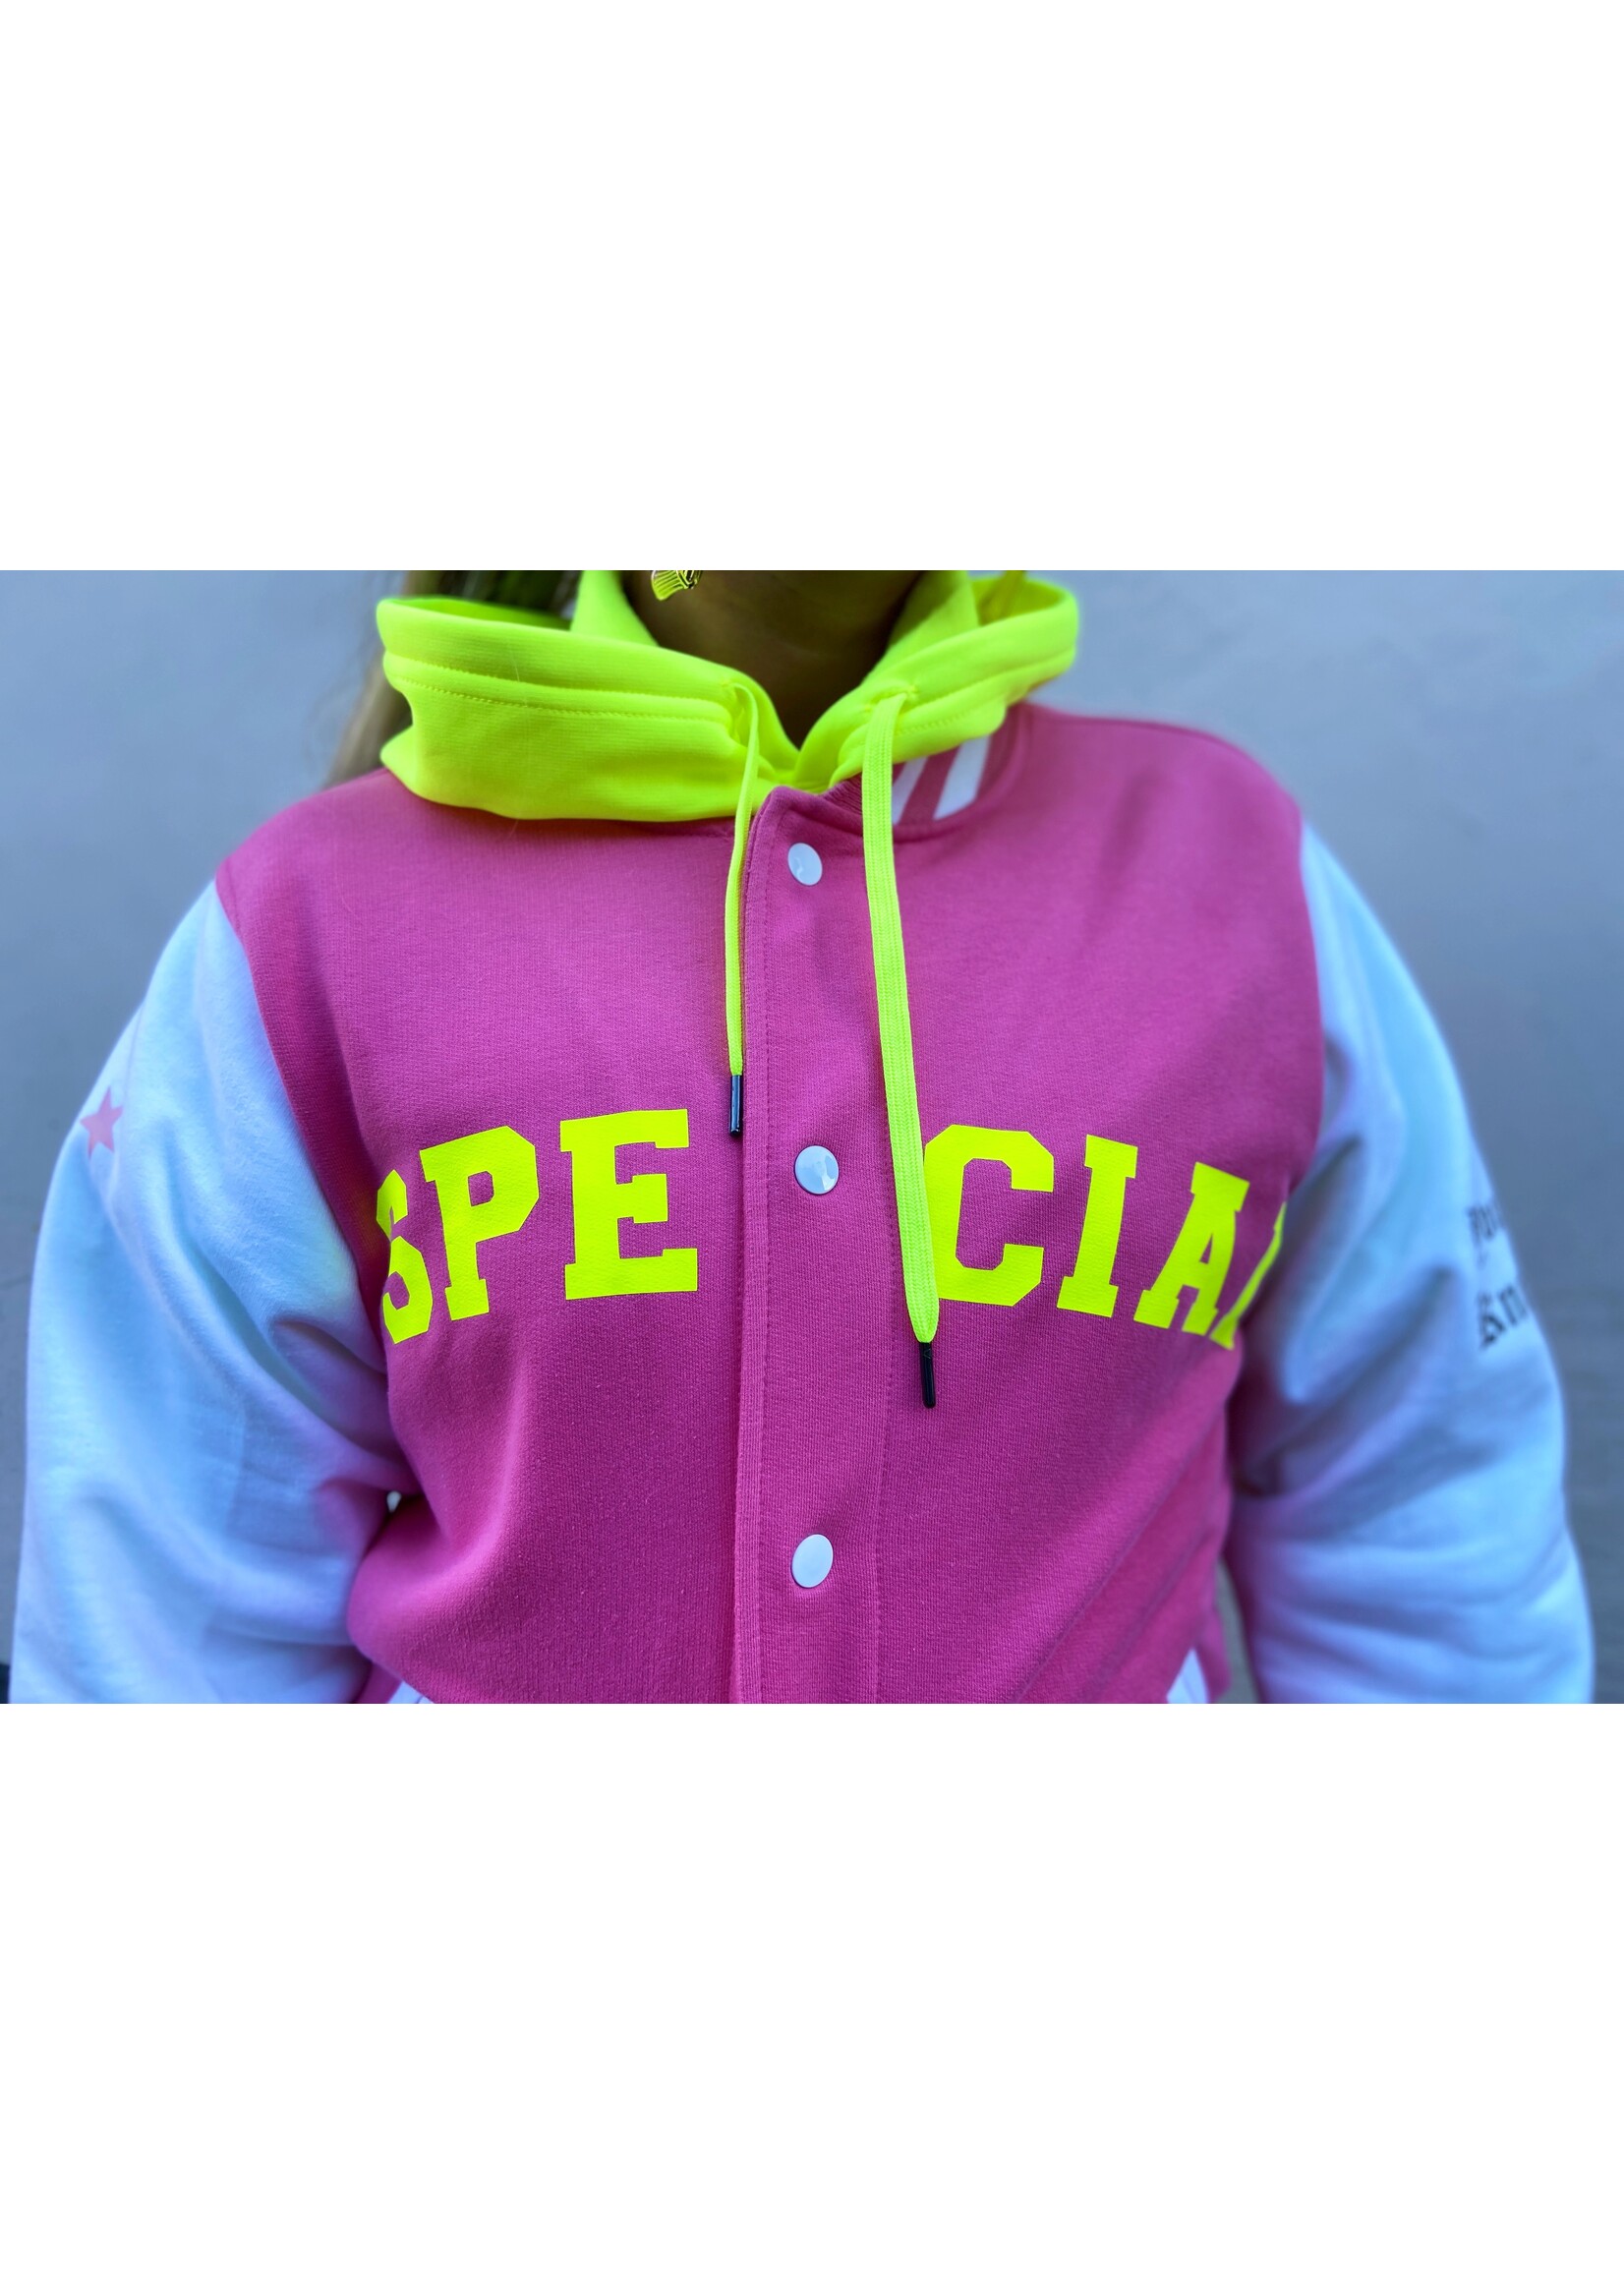 YOU ARE SPECIAL ''Paillet mouth'' Pink Baseball Jacket